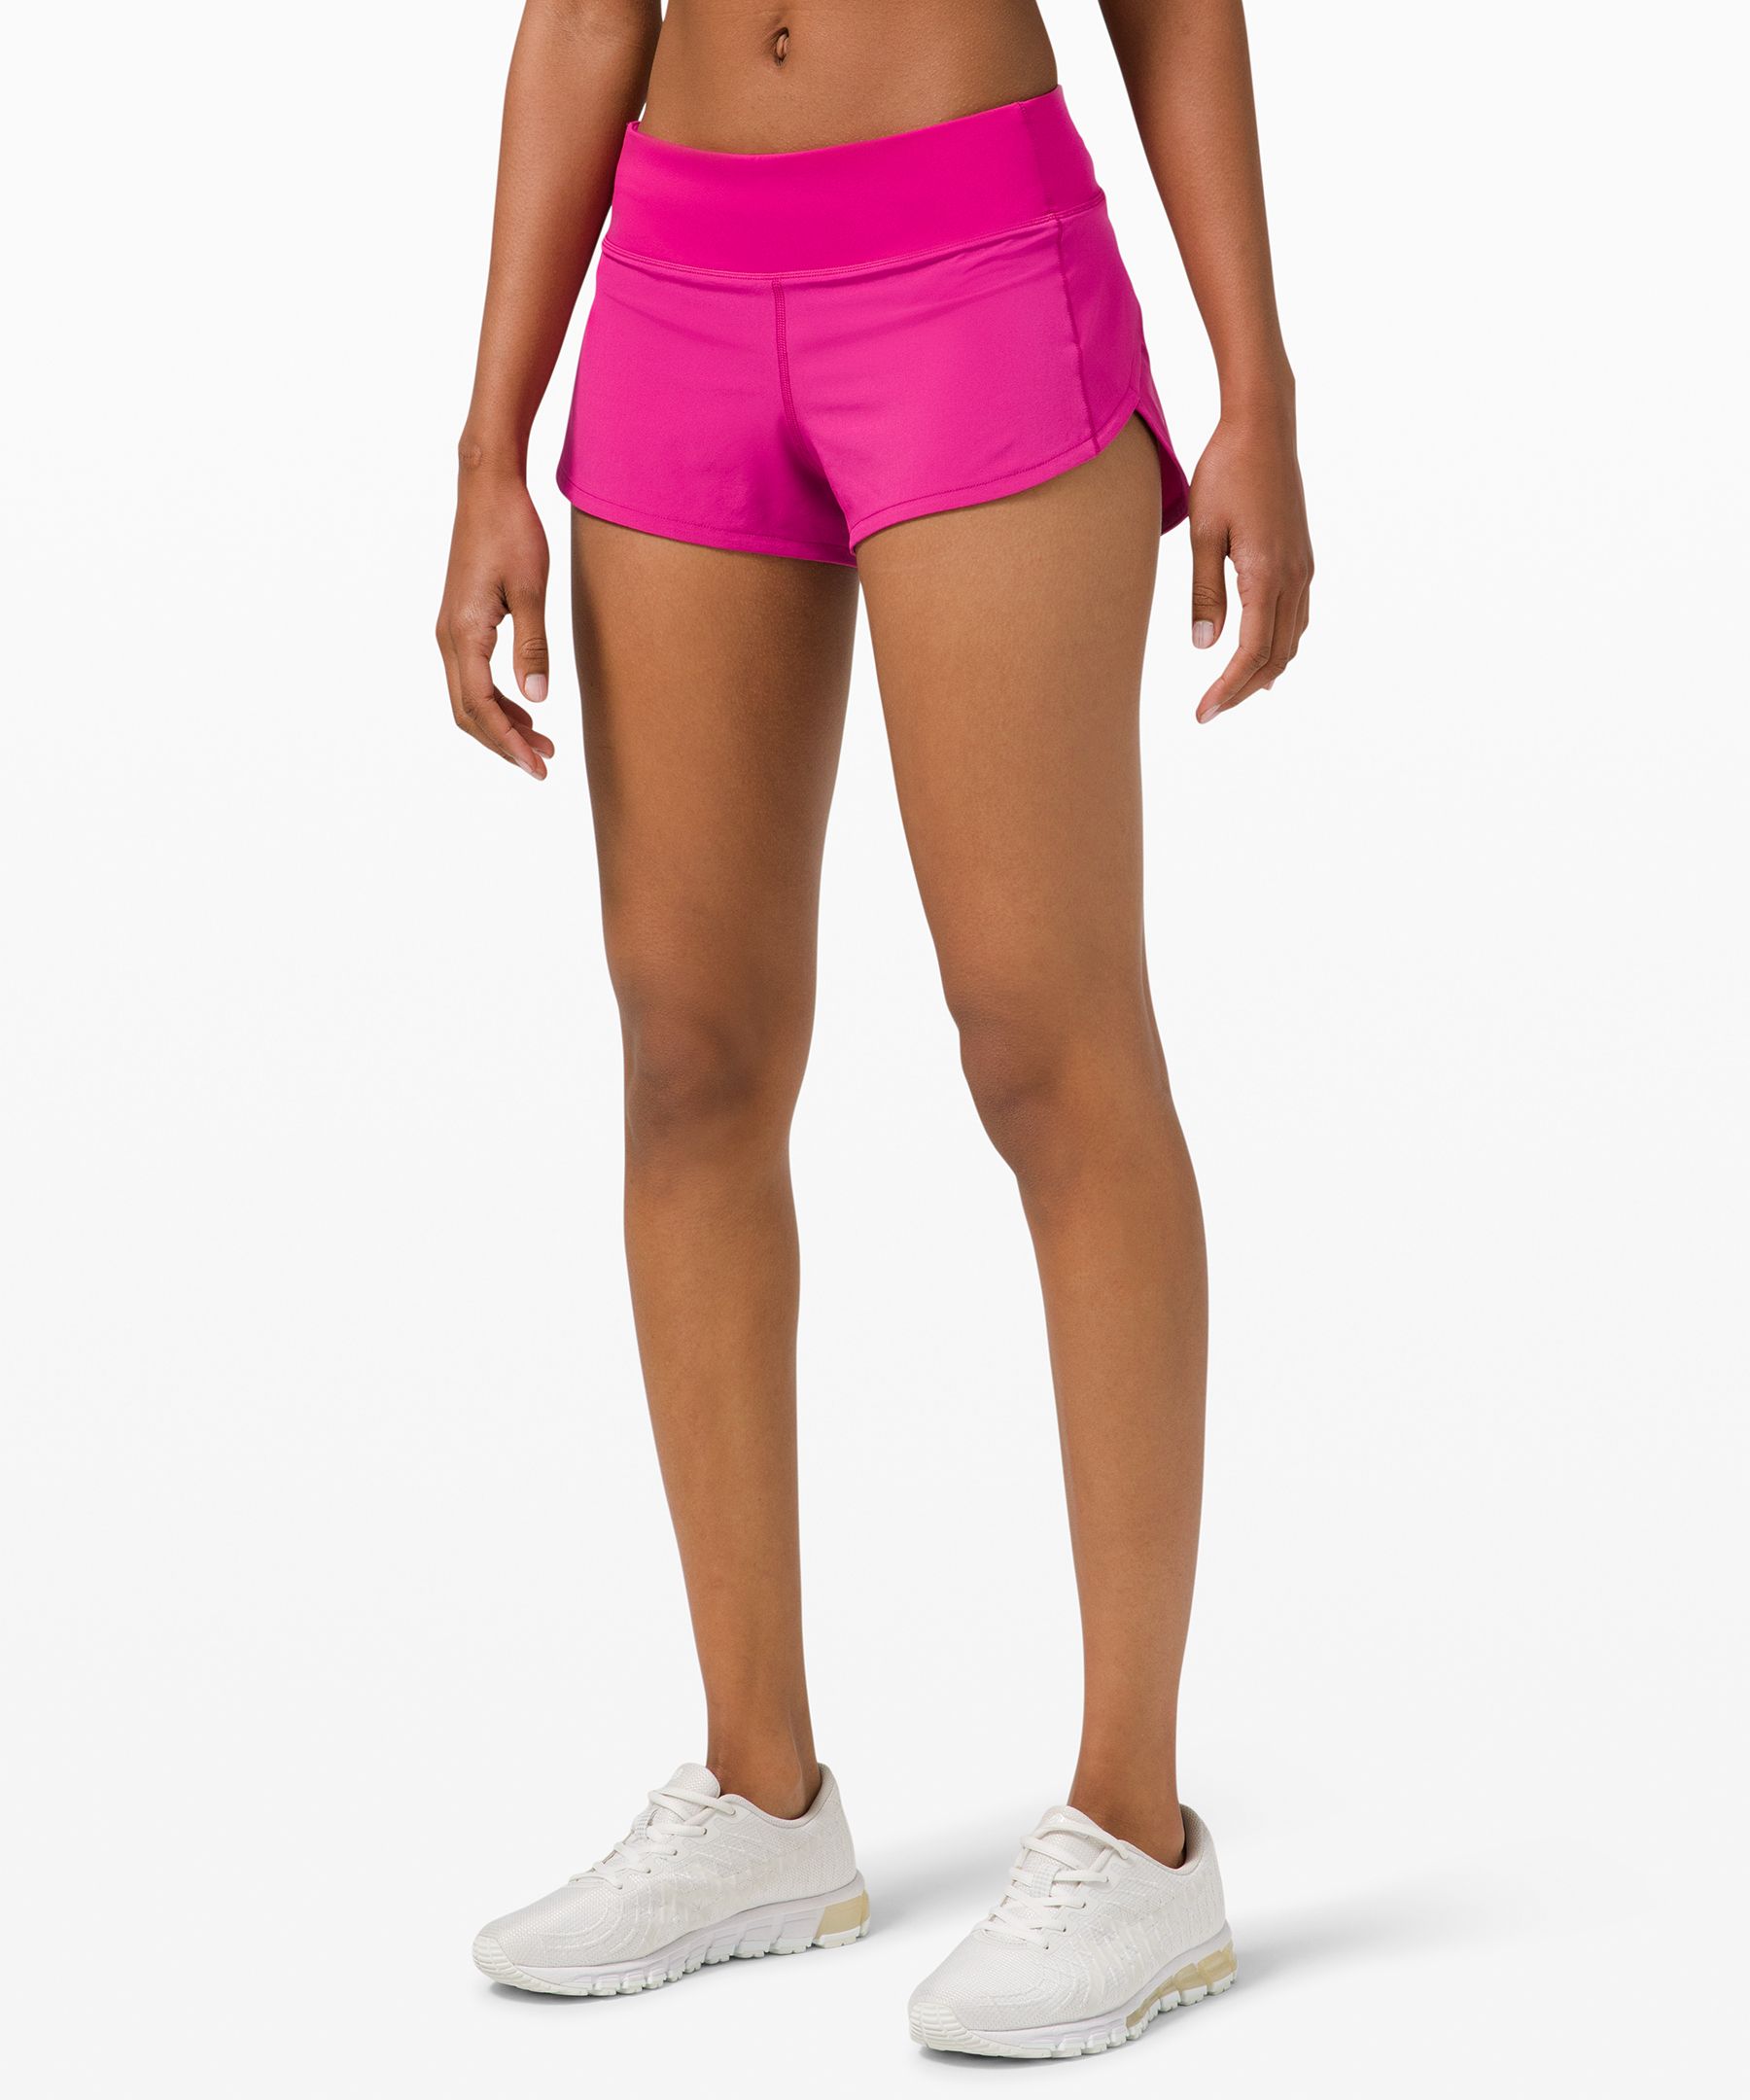 Lululemon Speed Up Low-rise Lined Shorts 2.5 - Poolside